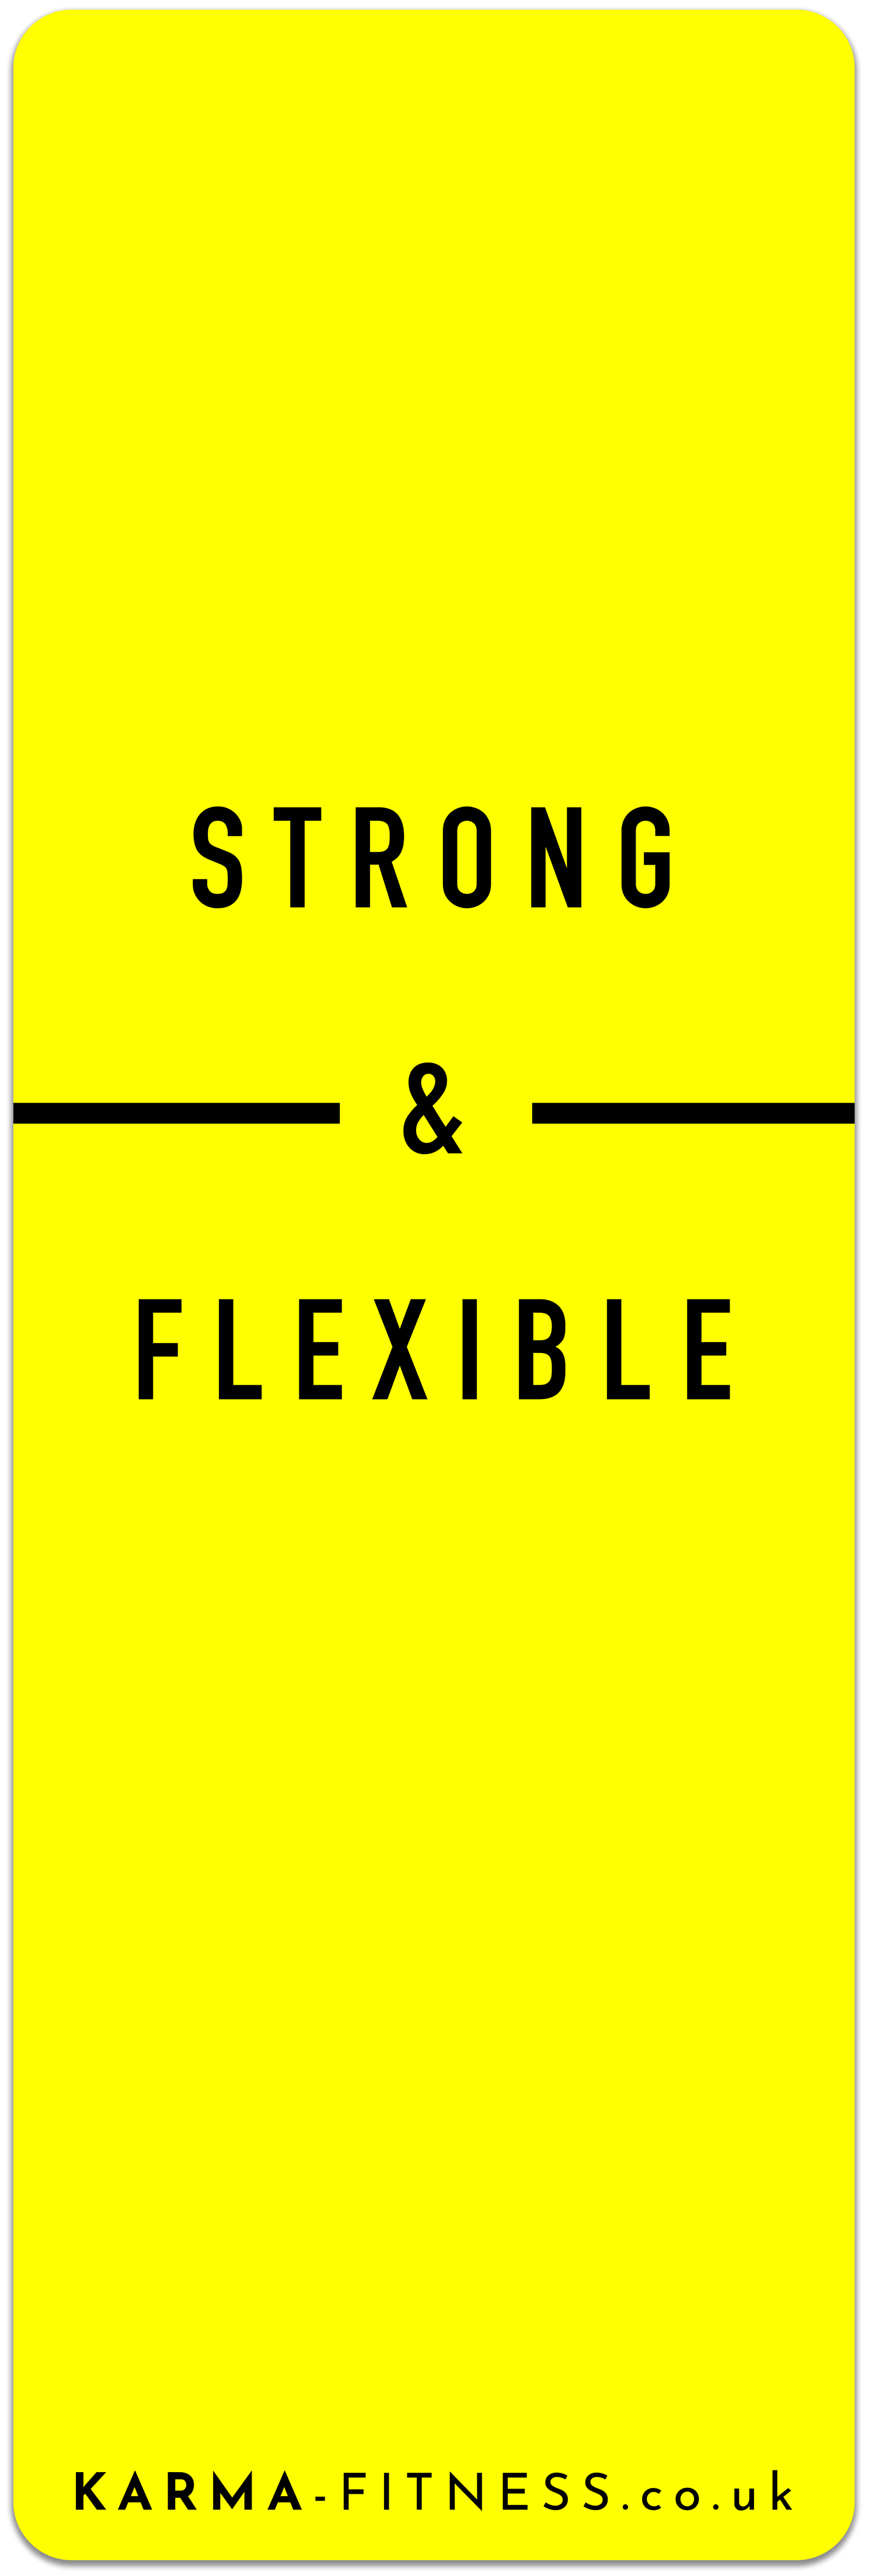 Strong and Flexible Fitness Workout Mat - Yoga Width